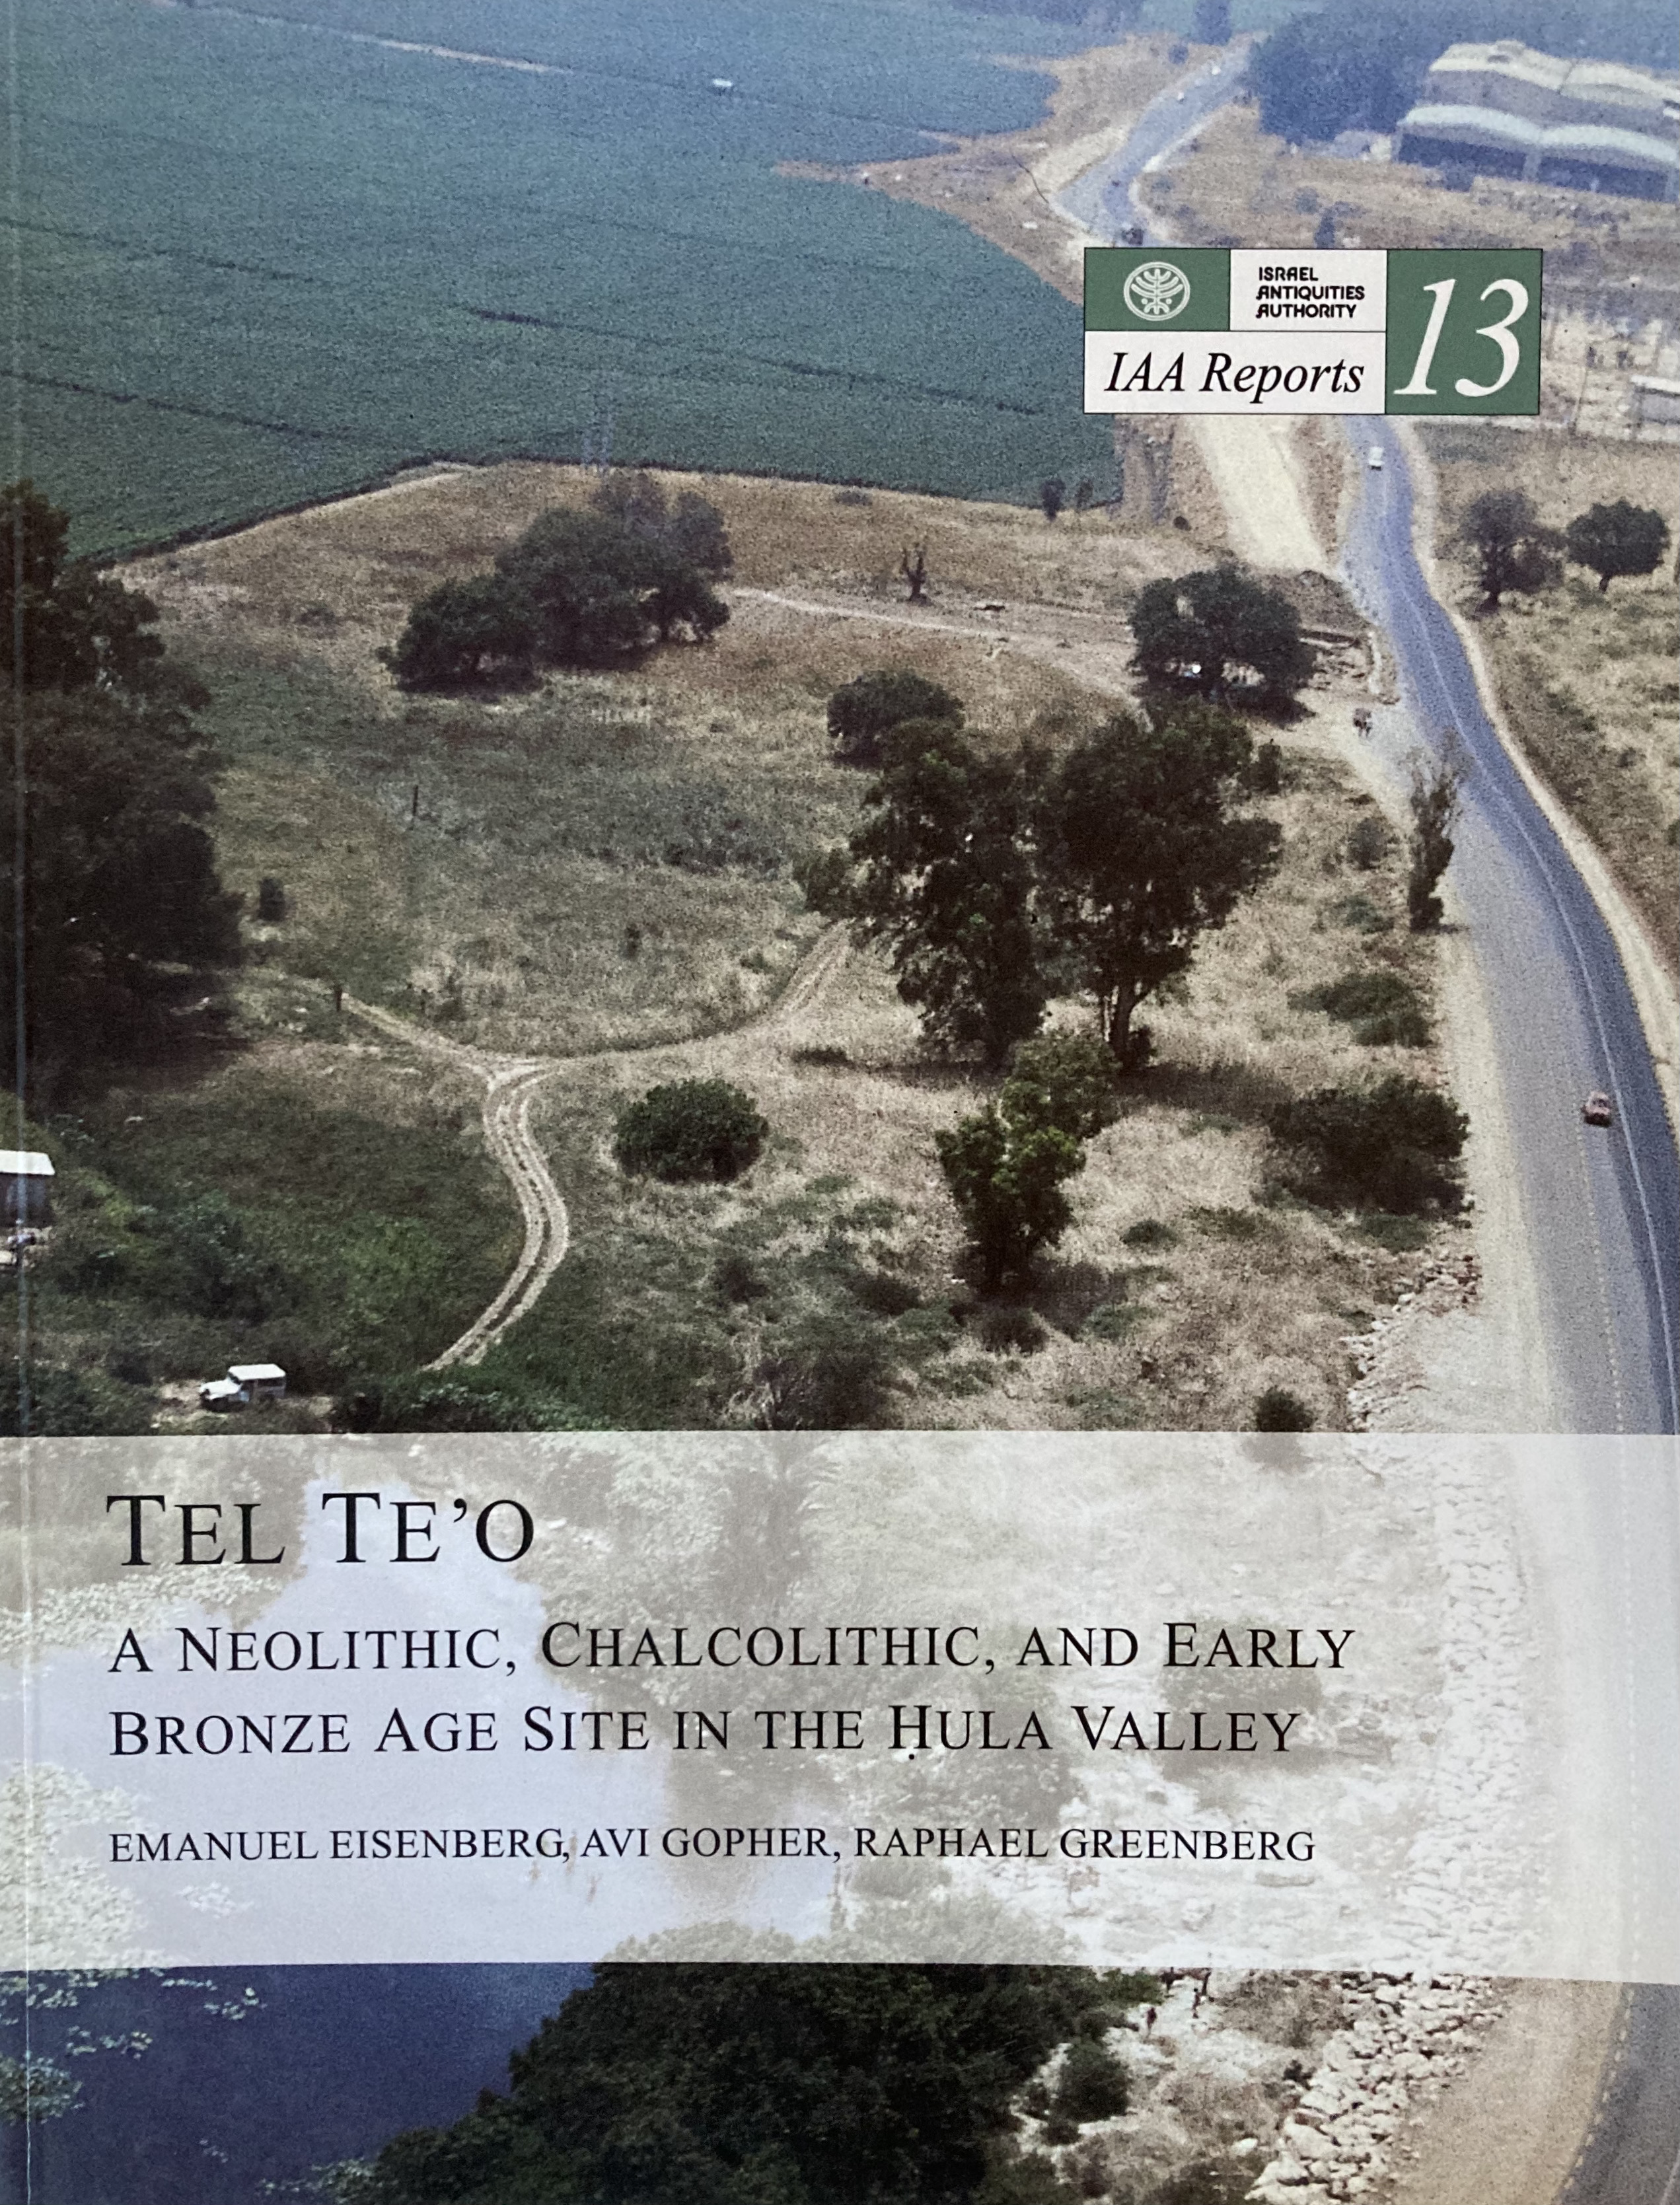 Tel Te'o : A Neolithic, Chalcolithic and Early Bronze Age Site in the Hula Valley [IAA Reports 13] - Emanuel Eisenberg, Avi Gopher, Raphael Greenberg ; with contributions by Yuval Goren [and others]